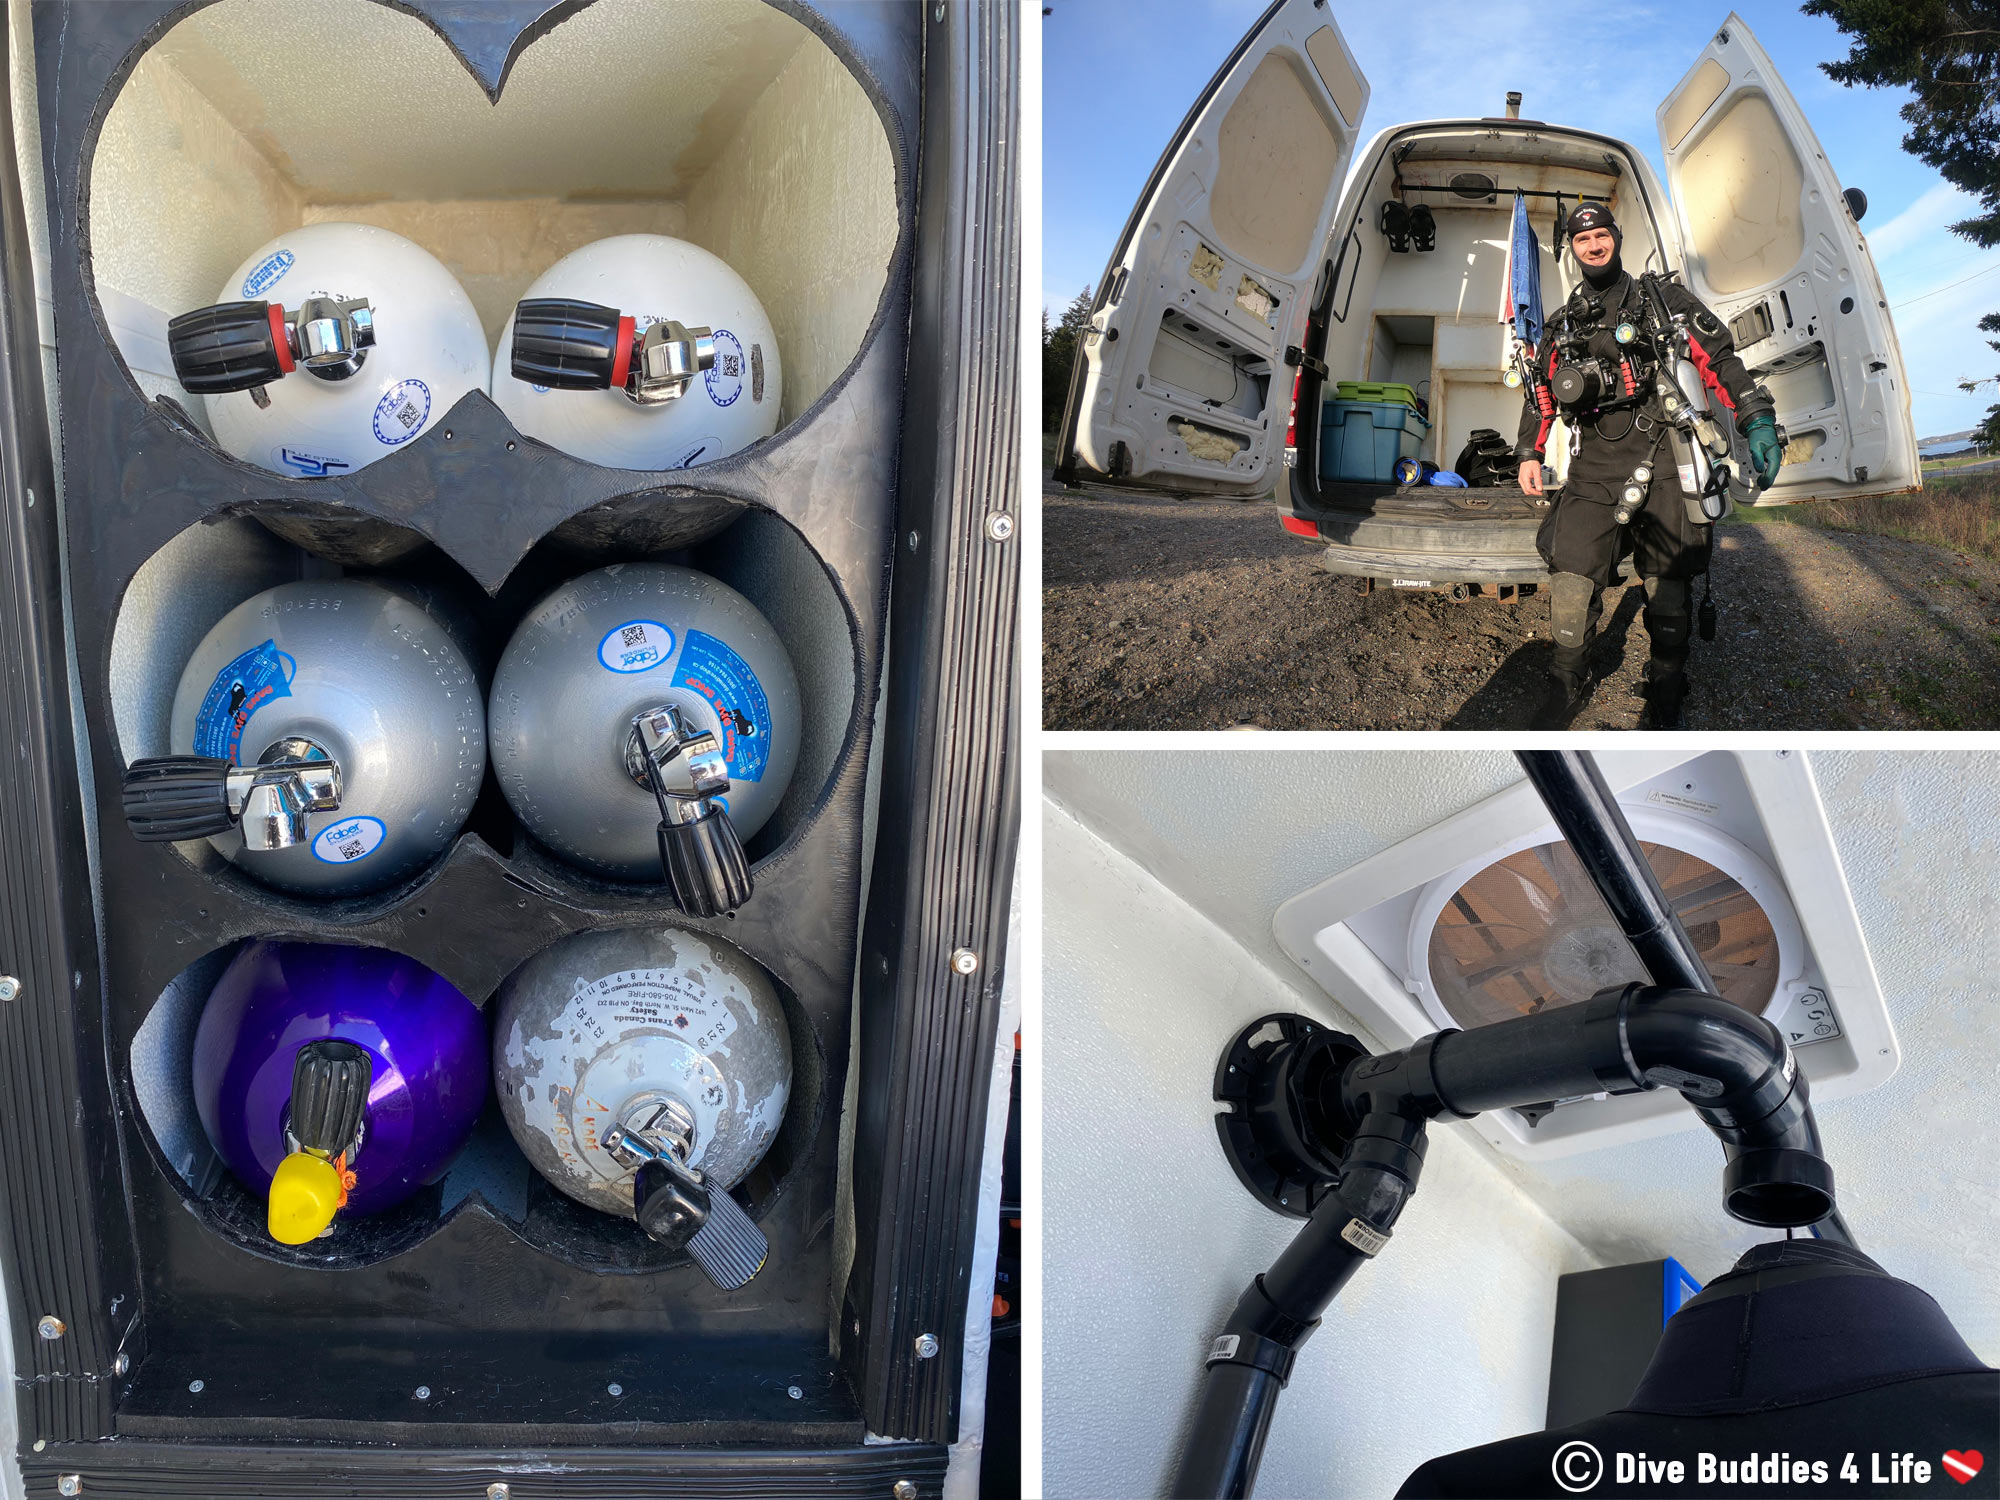 The Scuba Diving Components Of The Dive Locker In The Fish Bowl Van